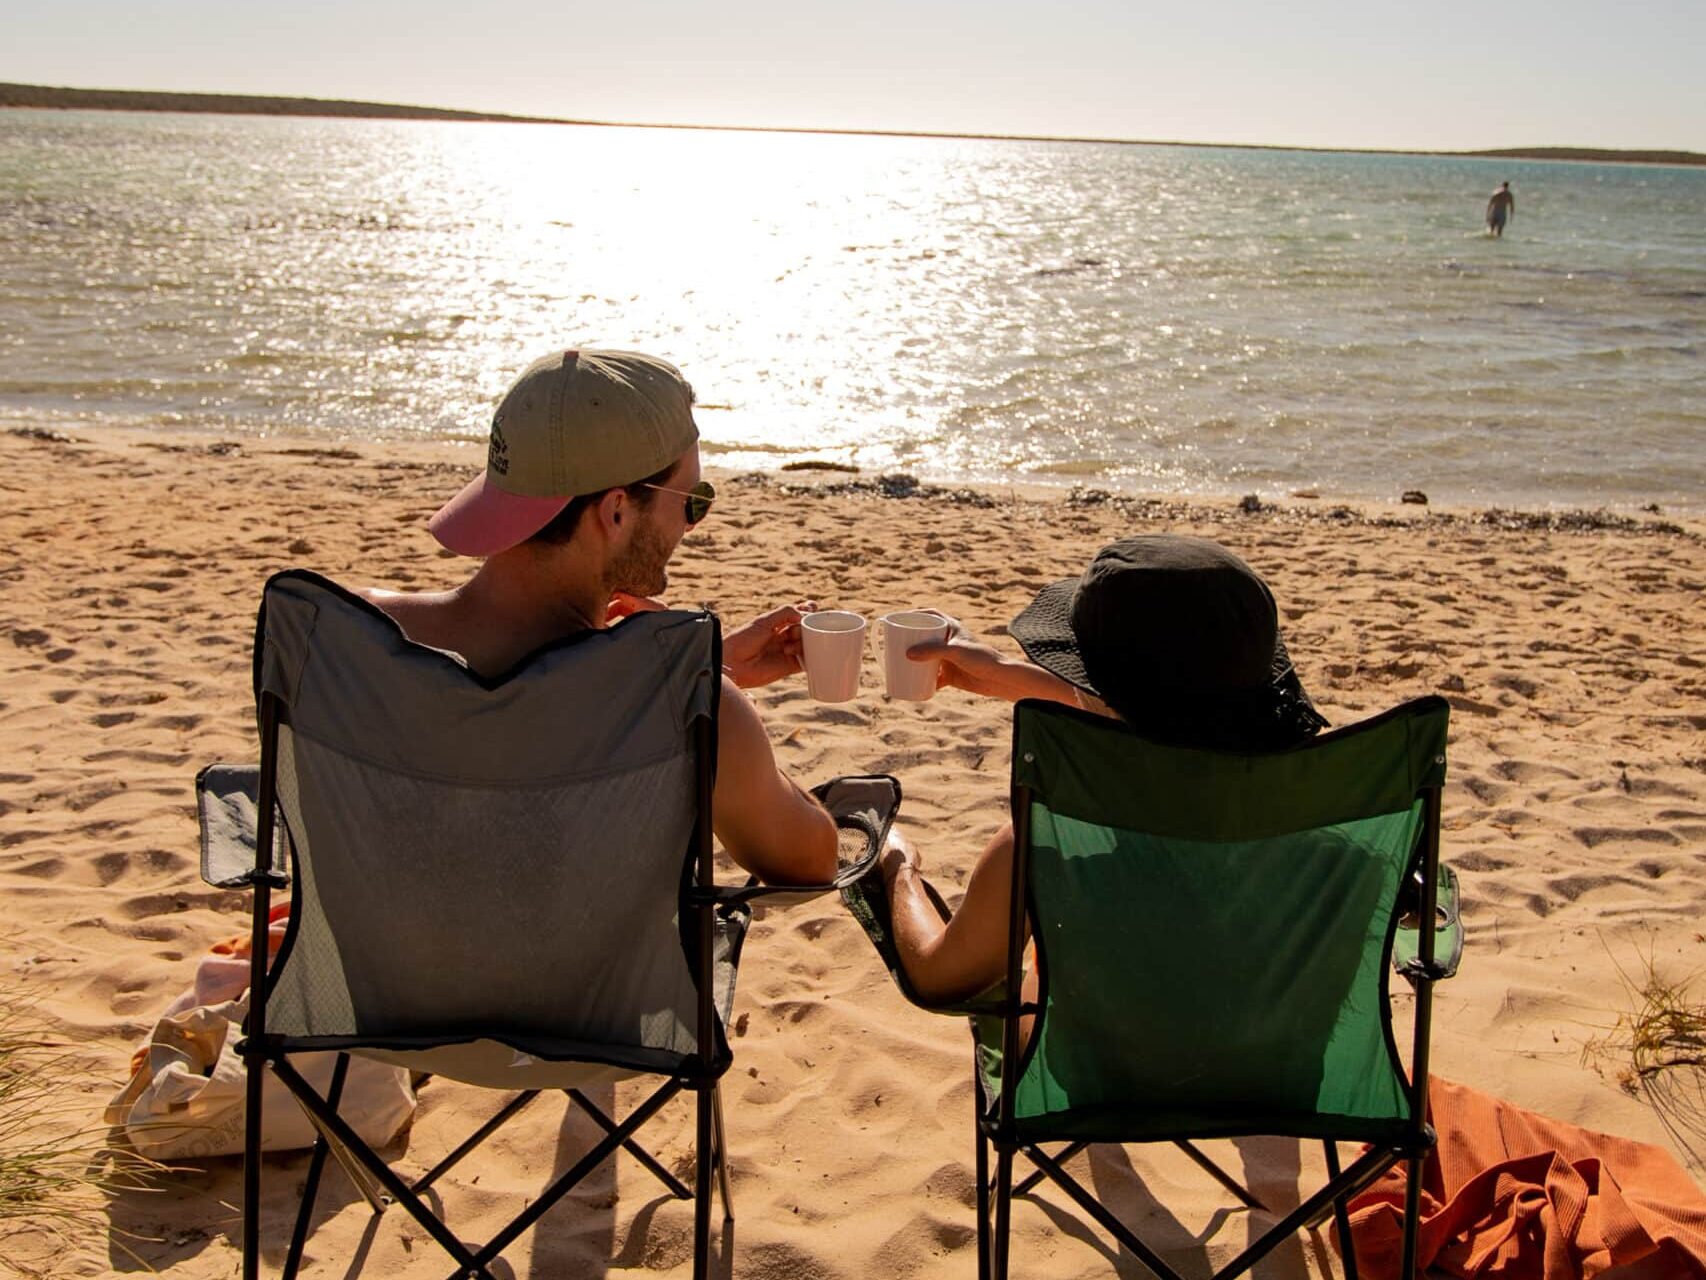 Two people sitting on camping chairs on the beach